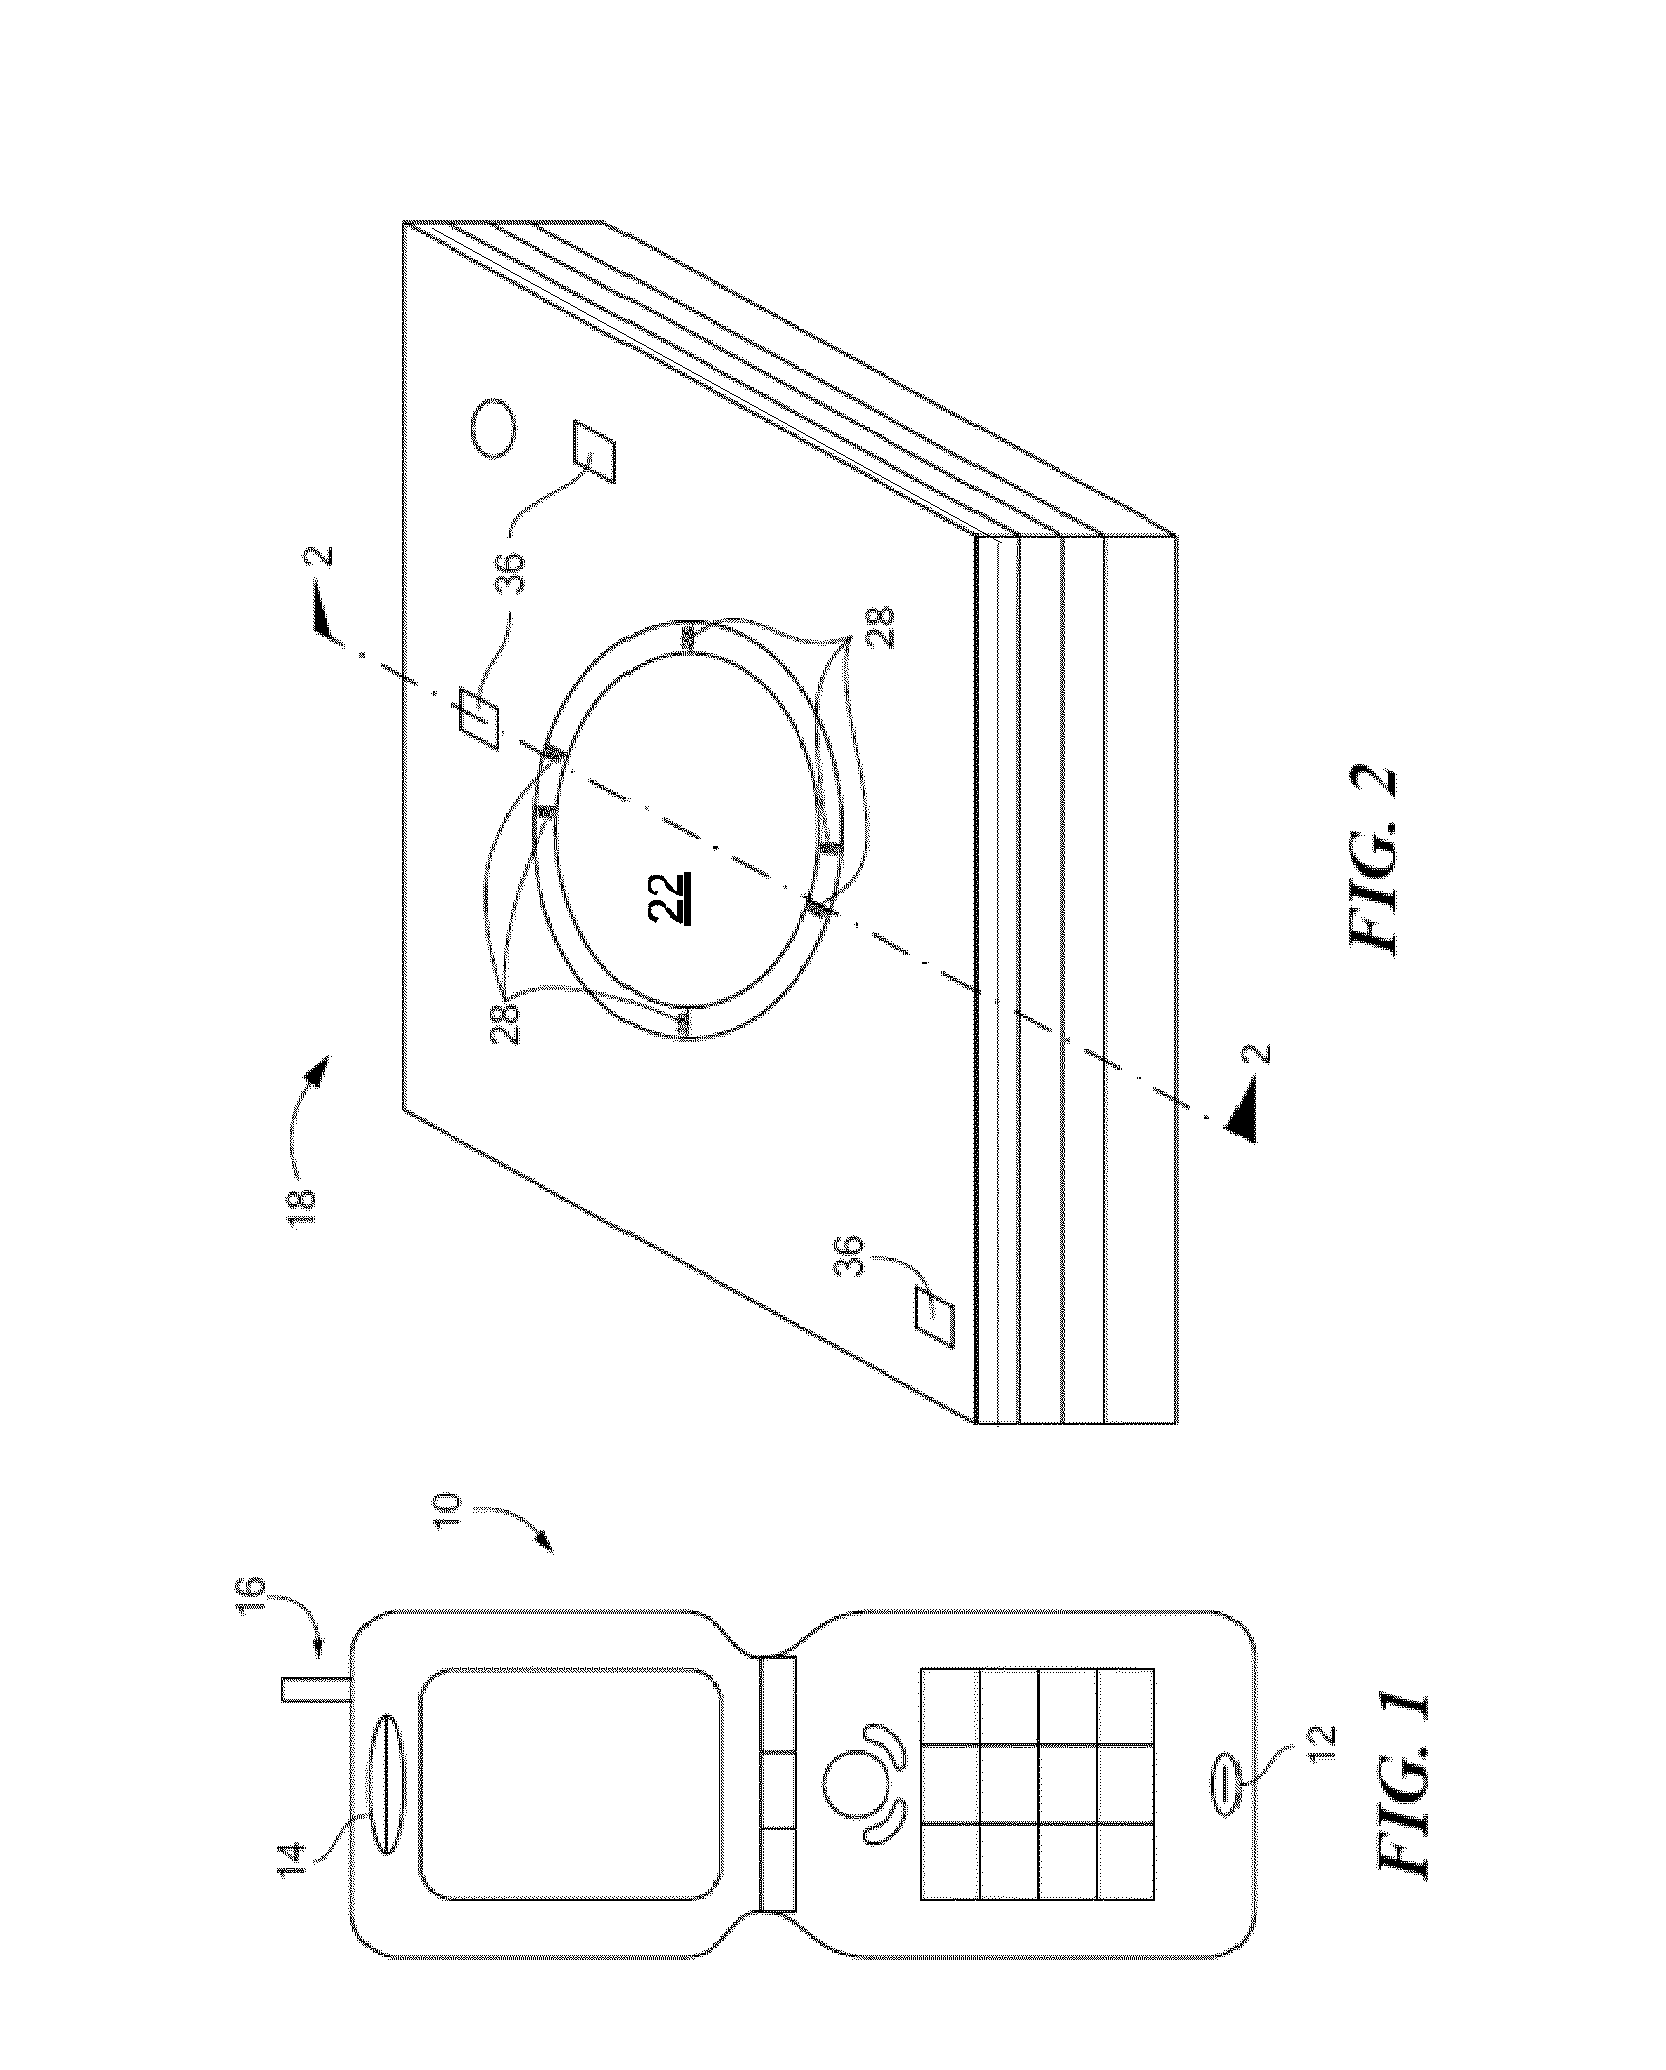 Dual Single-Crystal Backplate Microphone System and Method Of Fabricating Same